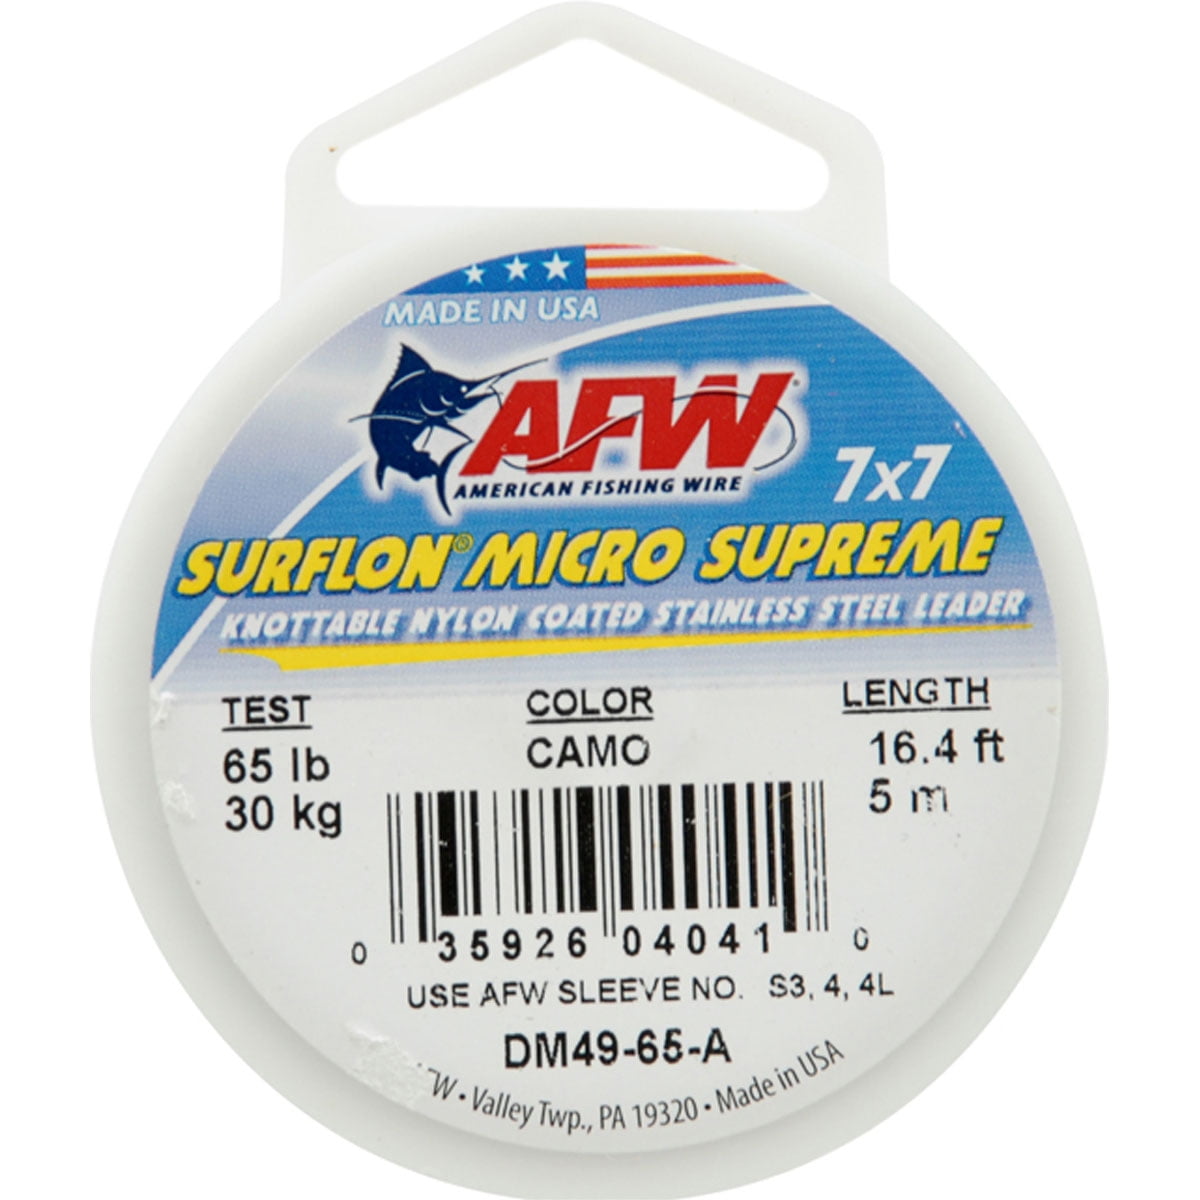 14 AFW TOOTH PROOF STAINLESS STEEL LEADER WIRE 218 LB 30' -.Diam